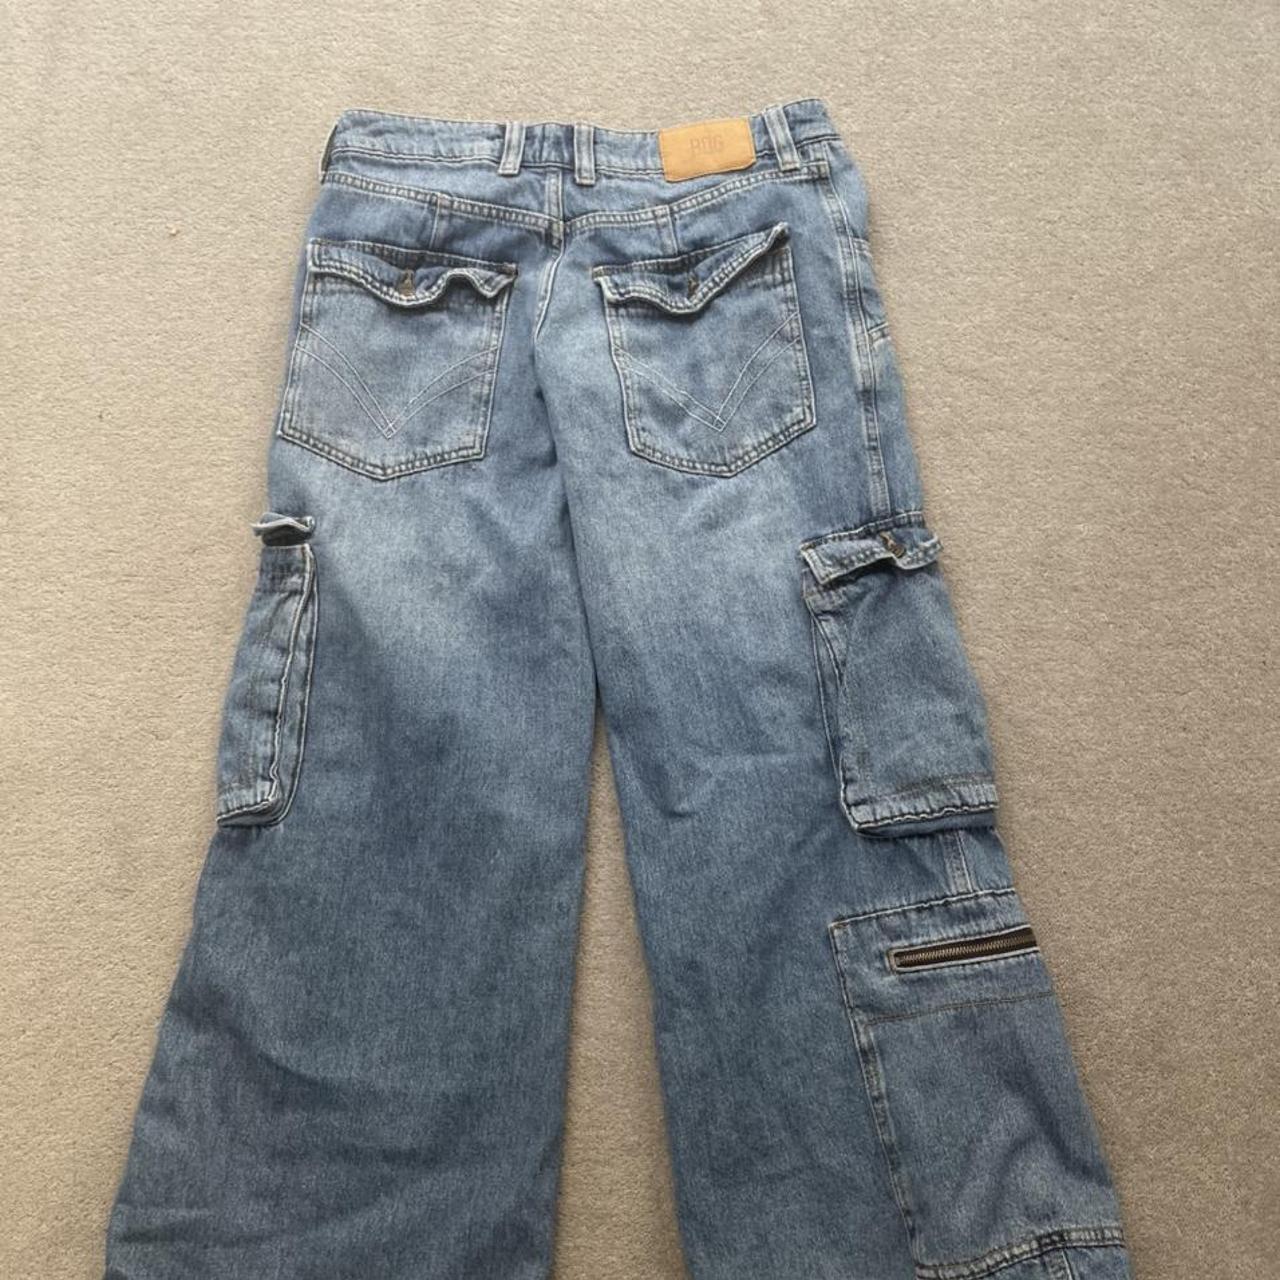 Denim cargos from urban outfitters size S, W28 and... - Depop